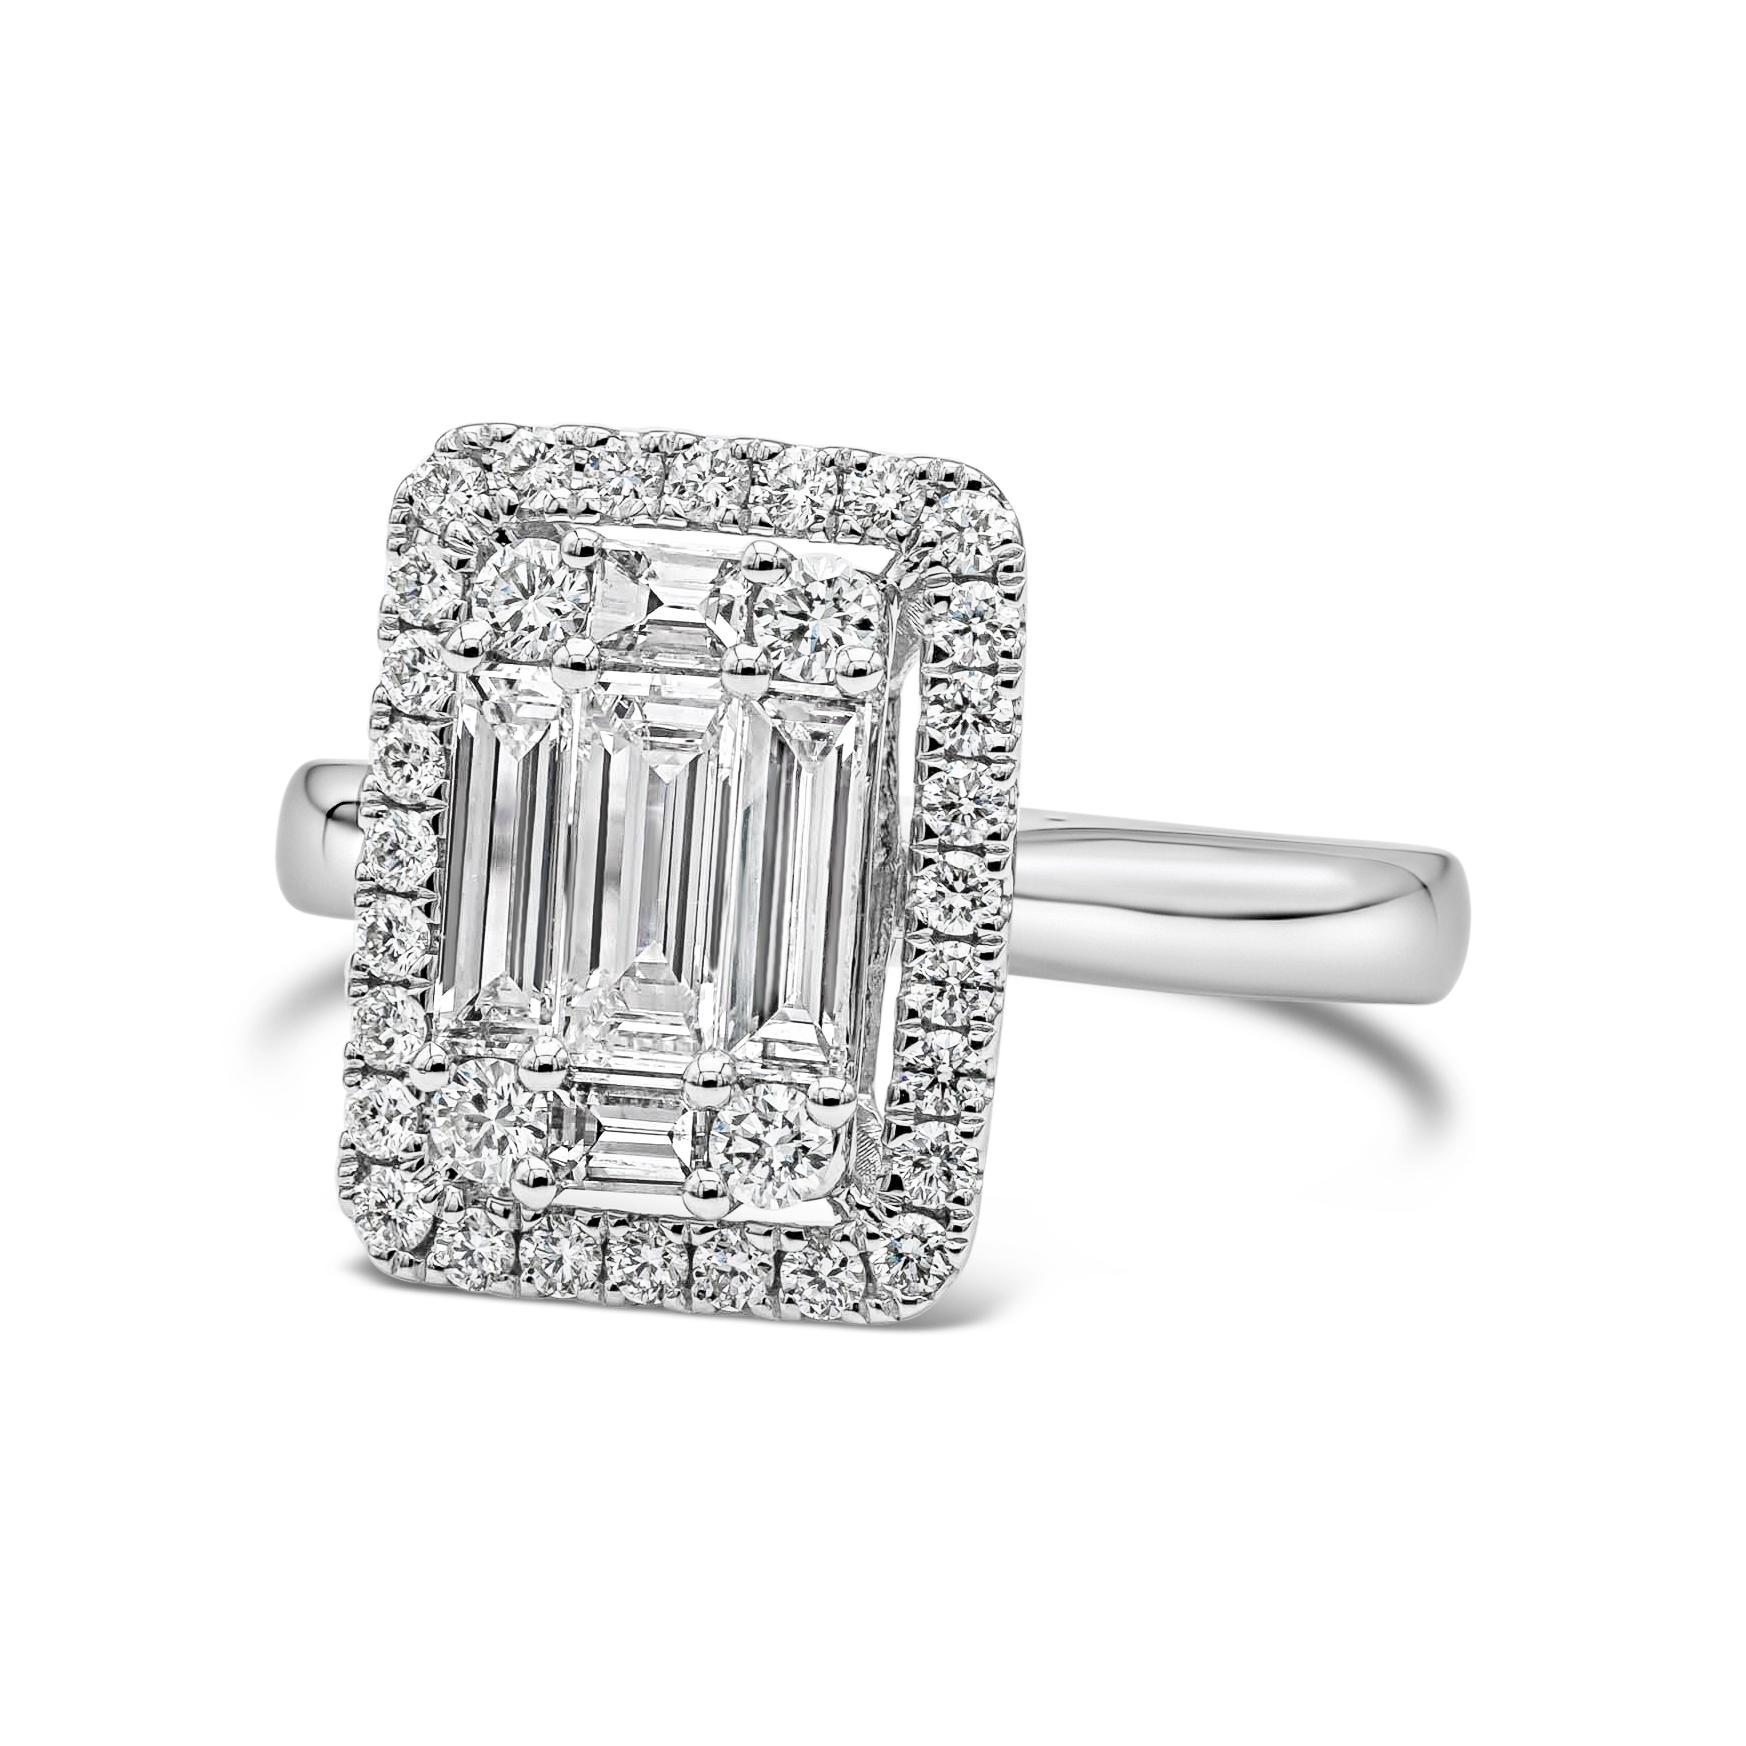 A brilliant and unique piece engagement ring featuring a cluster of baguette cut diamonds shaped like an emerald cut, surrounded by a single row of round brilliant diamonds. Baguette diamonds weigh 0.81 carats total; round diamonds weigh 0.43 carats